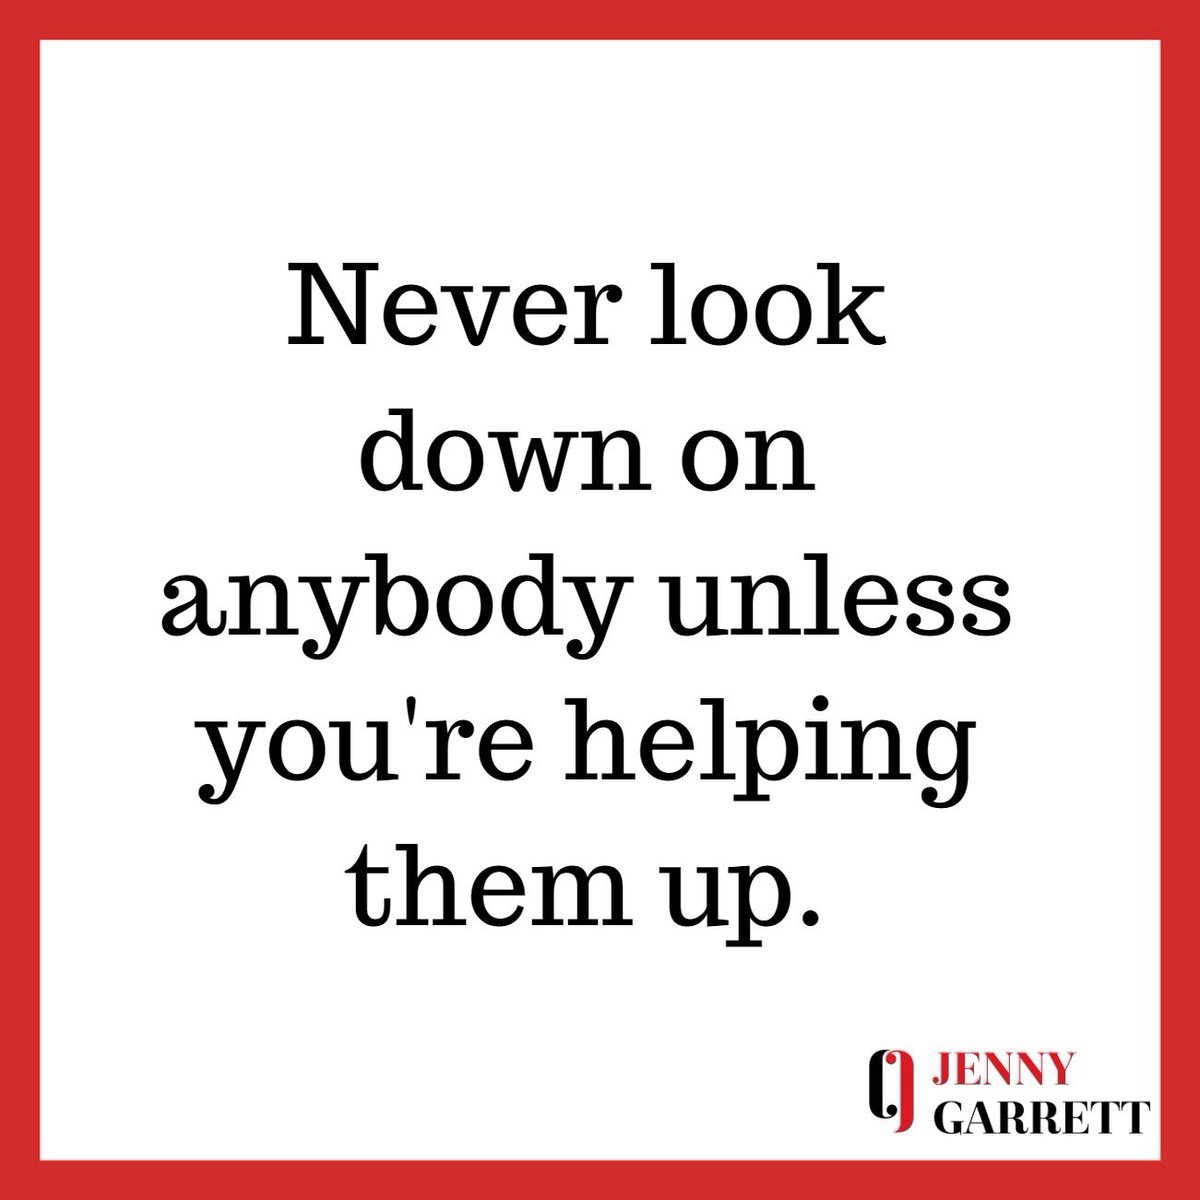 Sharing with you our quote of the week..... 'Never look down on anybody unless you're helping them up.' - Jesse Jackson #MondayMotivation #MondayBlues #Humility #Sisterhood #Happenista #Leadership